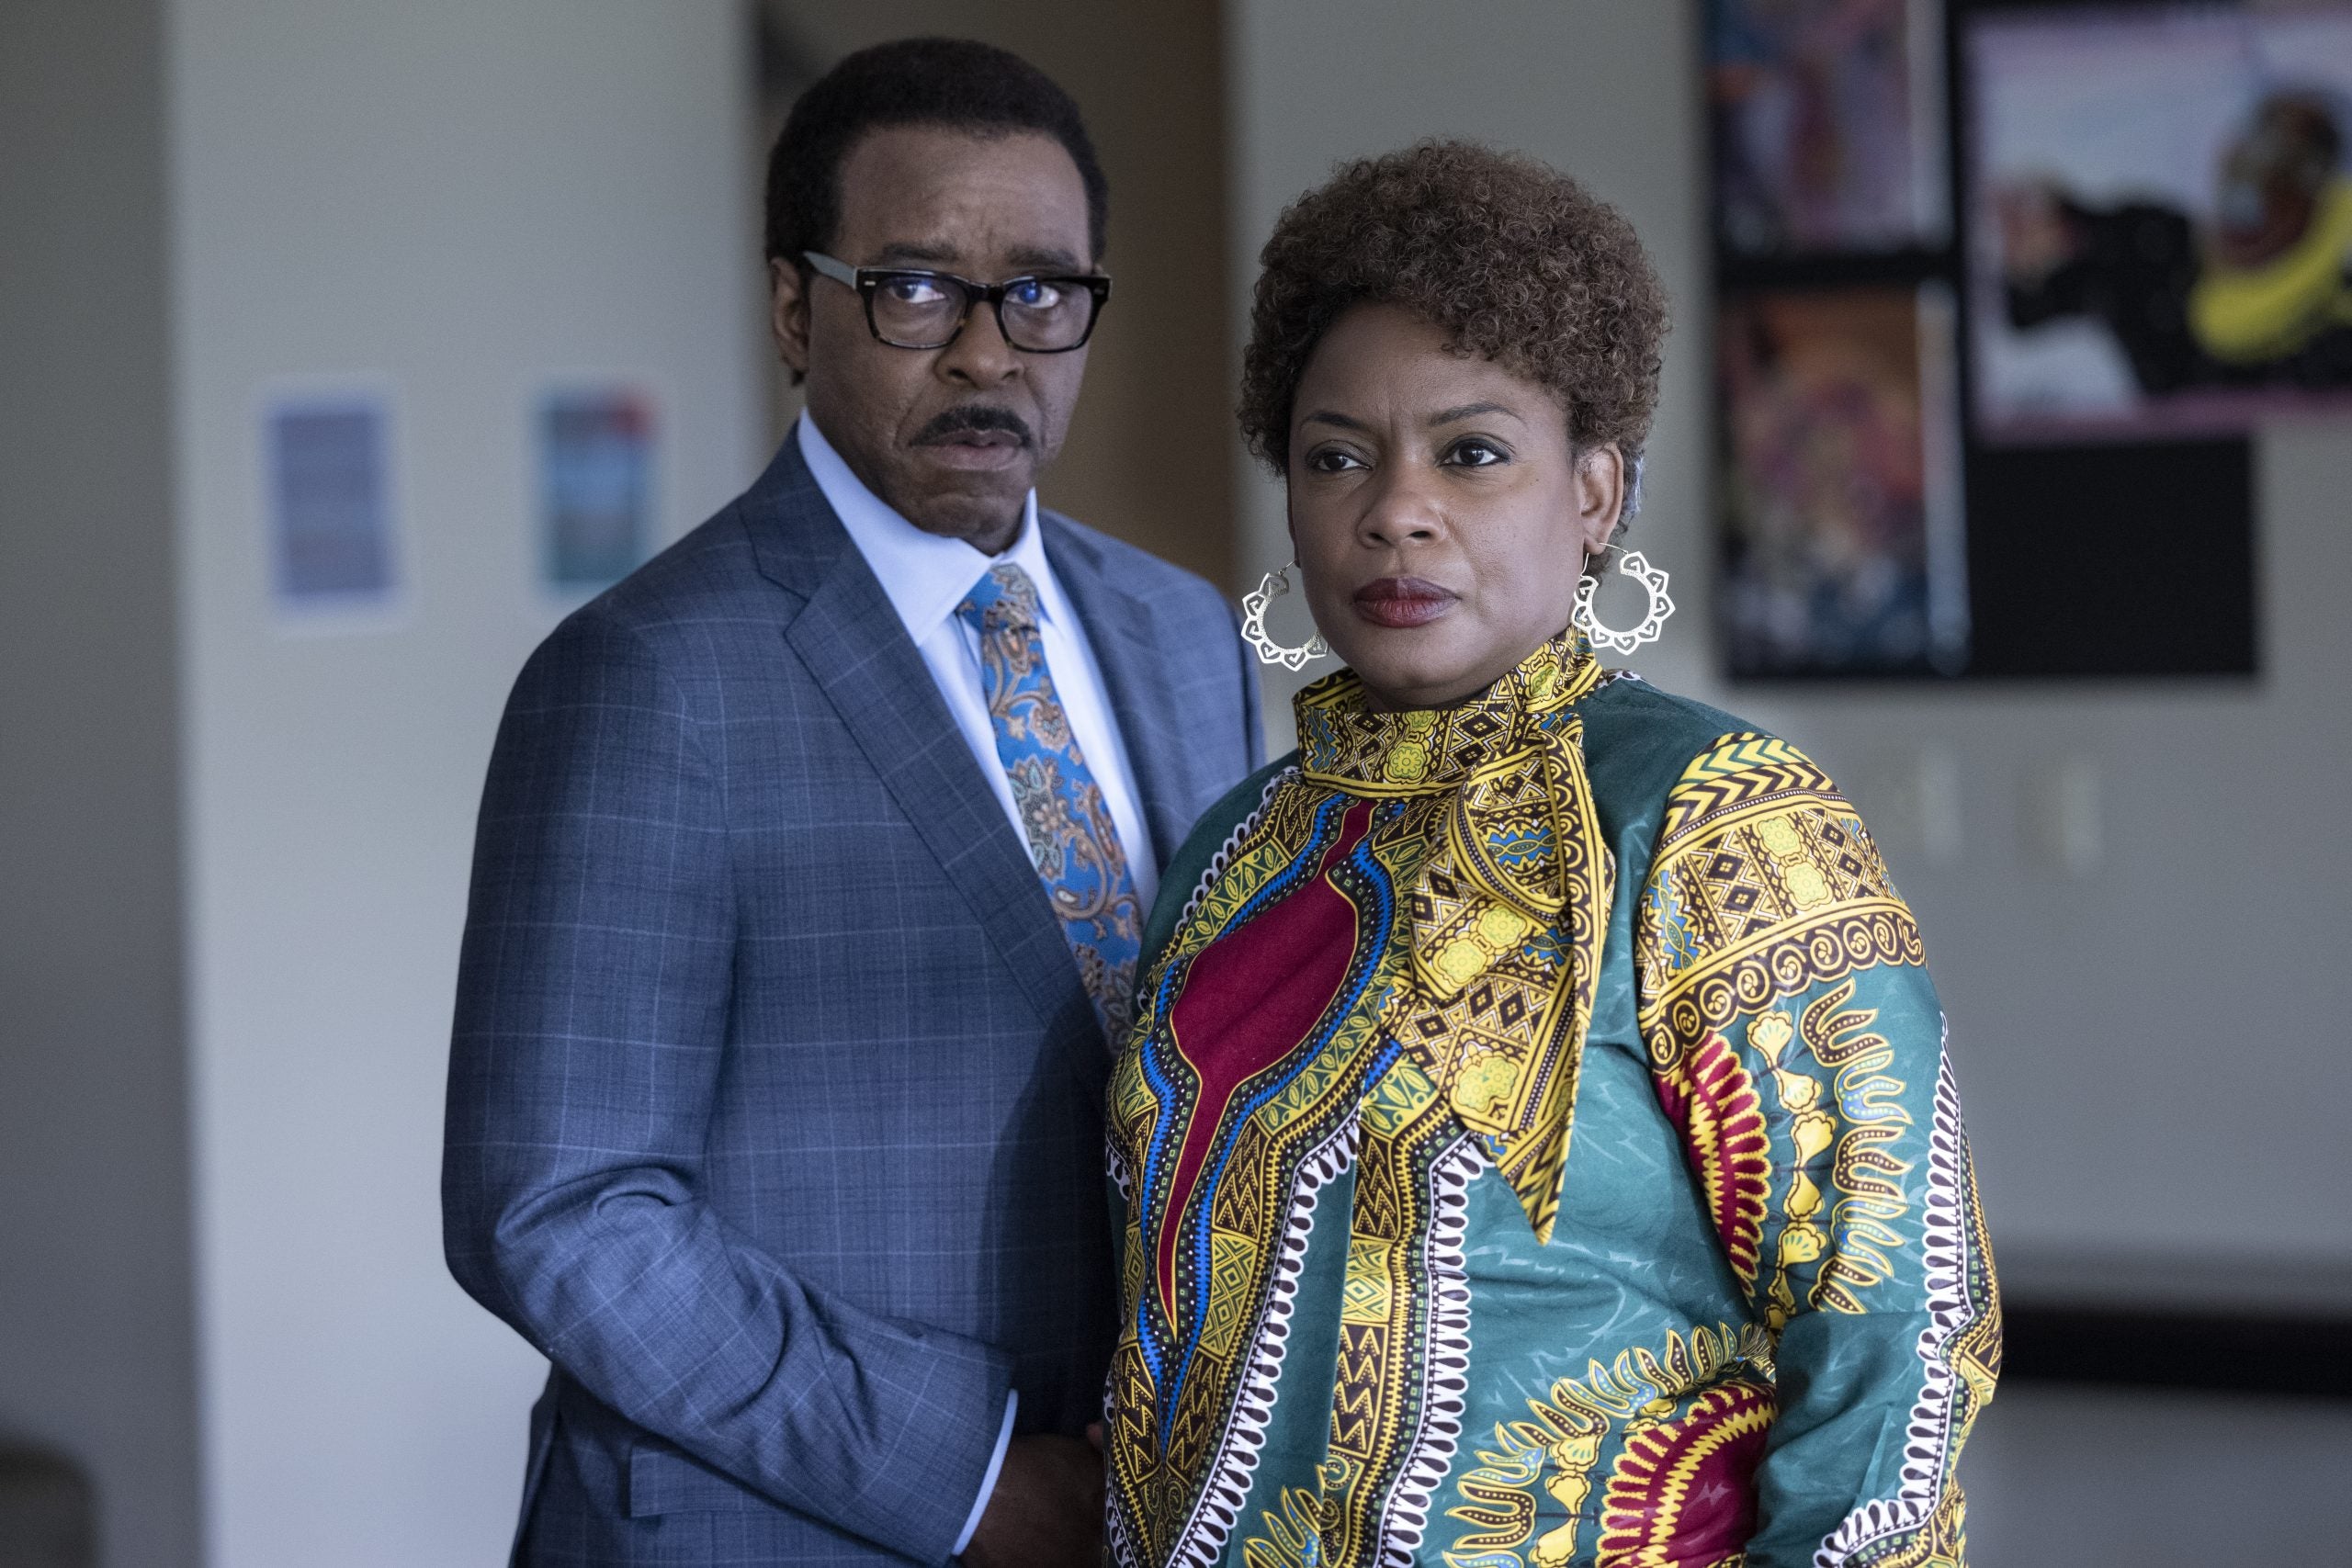 EXCLUSIVE: Watch Aunjanue Ellis and Courtney B. Vance In A First Look At ’61st Street’